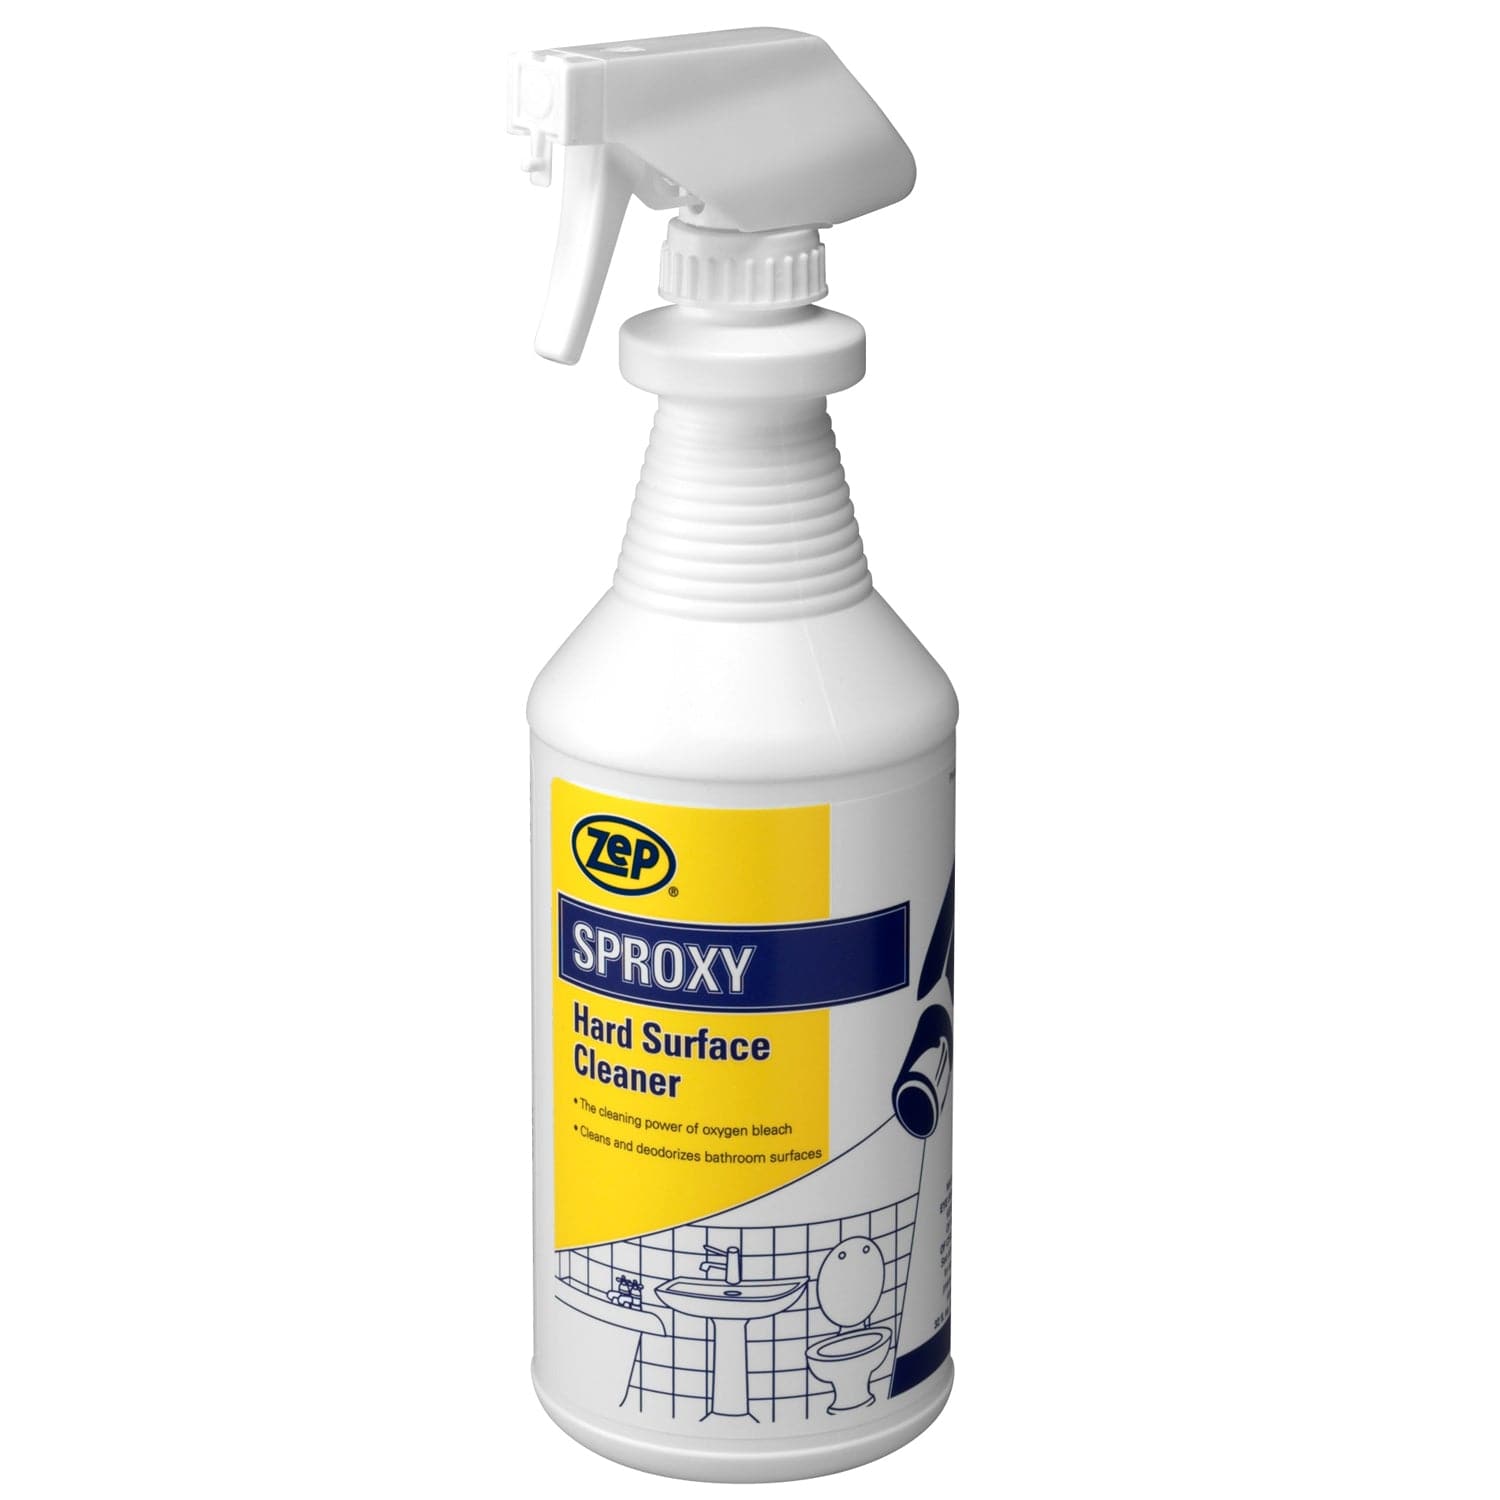 Image for Zep Sproxy Hard Surface Cleaner and Deodorizer with Bleach  - 32 oz.